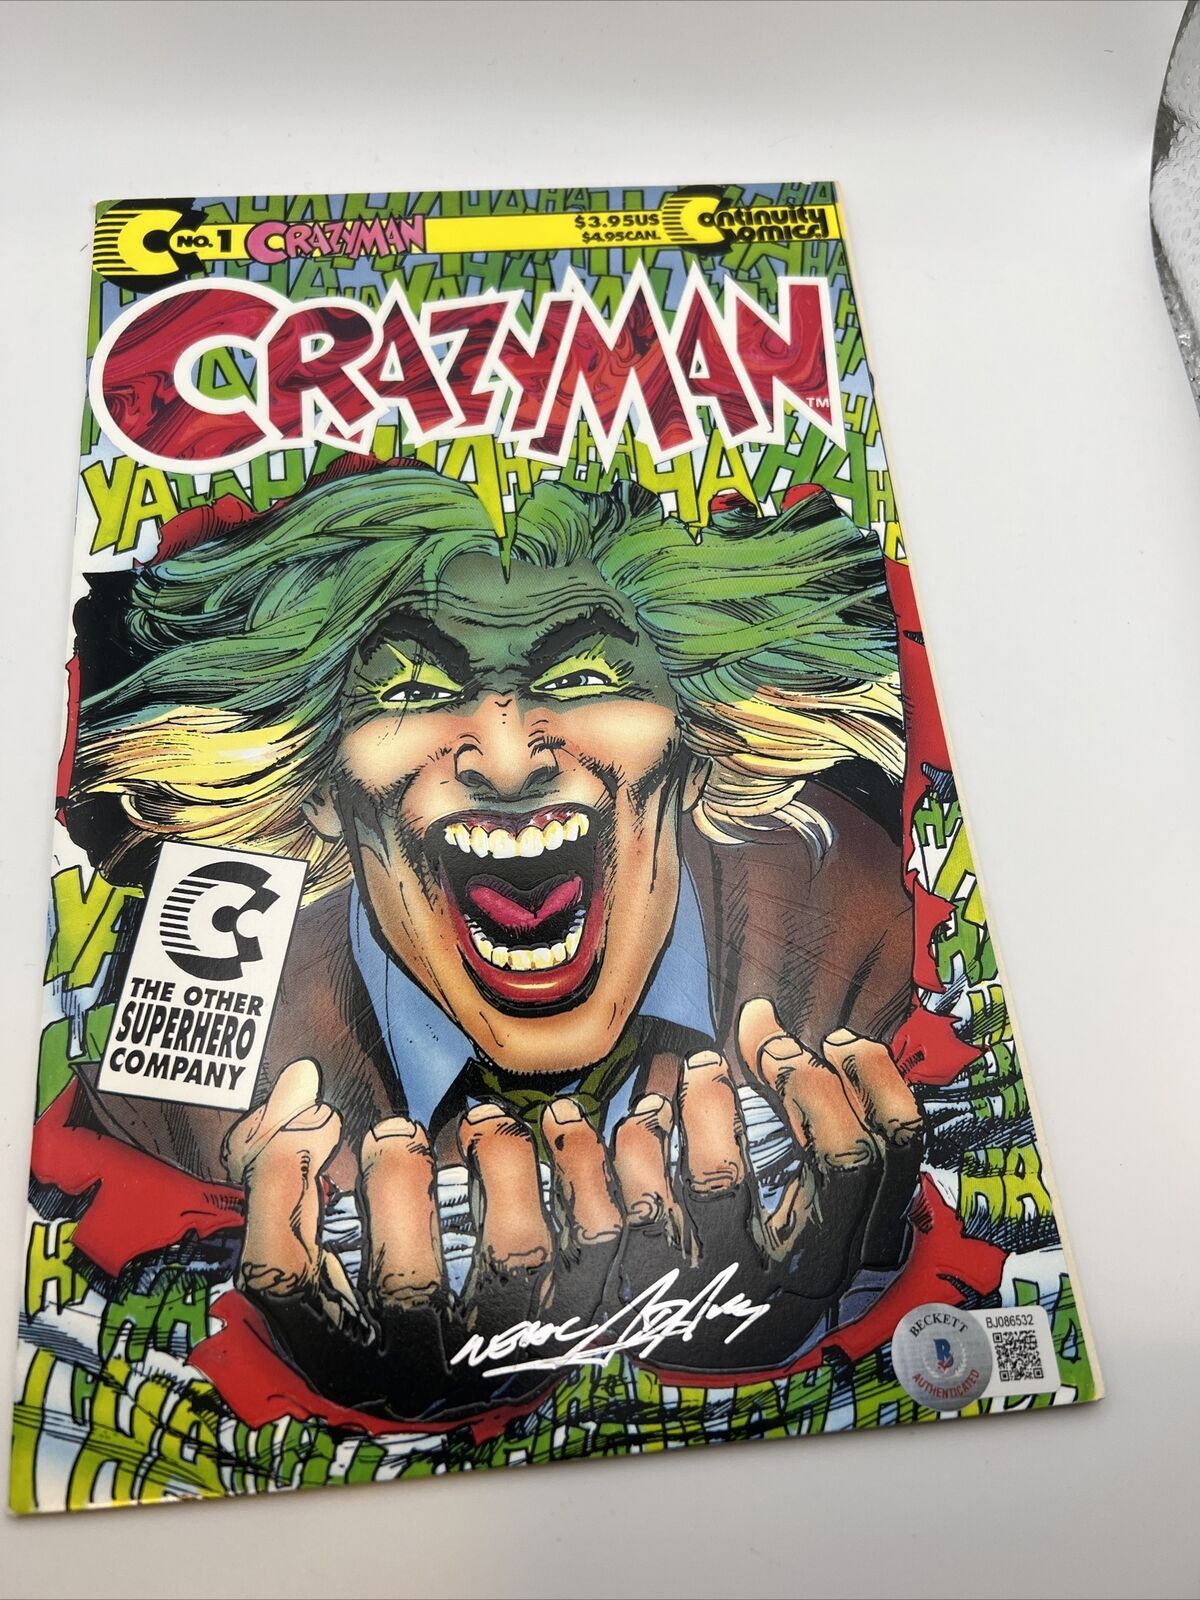 Crazyman Comic #1 (1991 )Signed By NEAL ADAMS, Beckett Signature Authenticated.